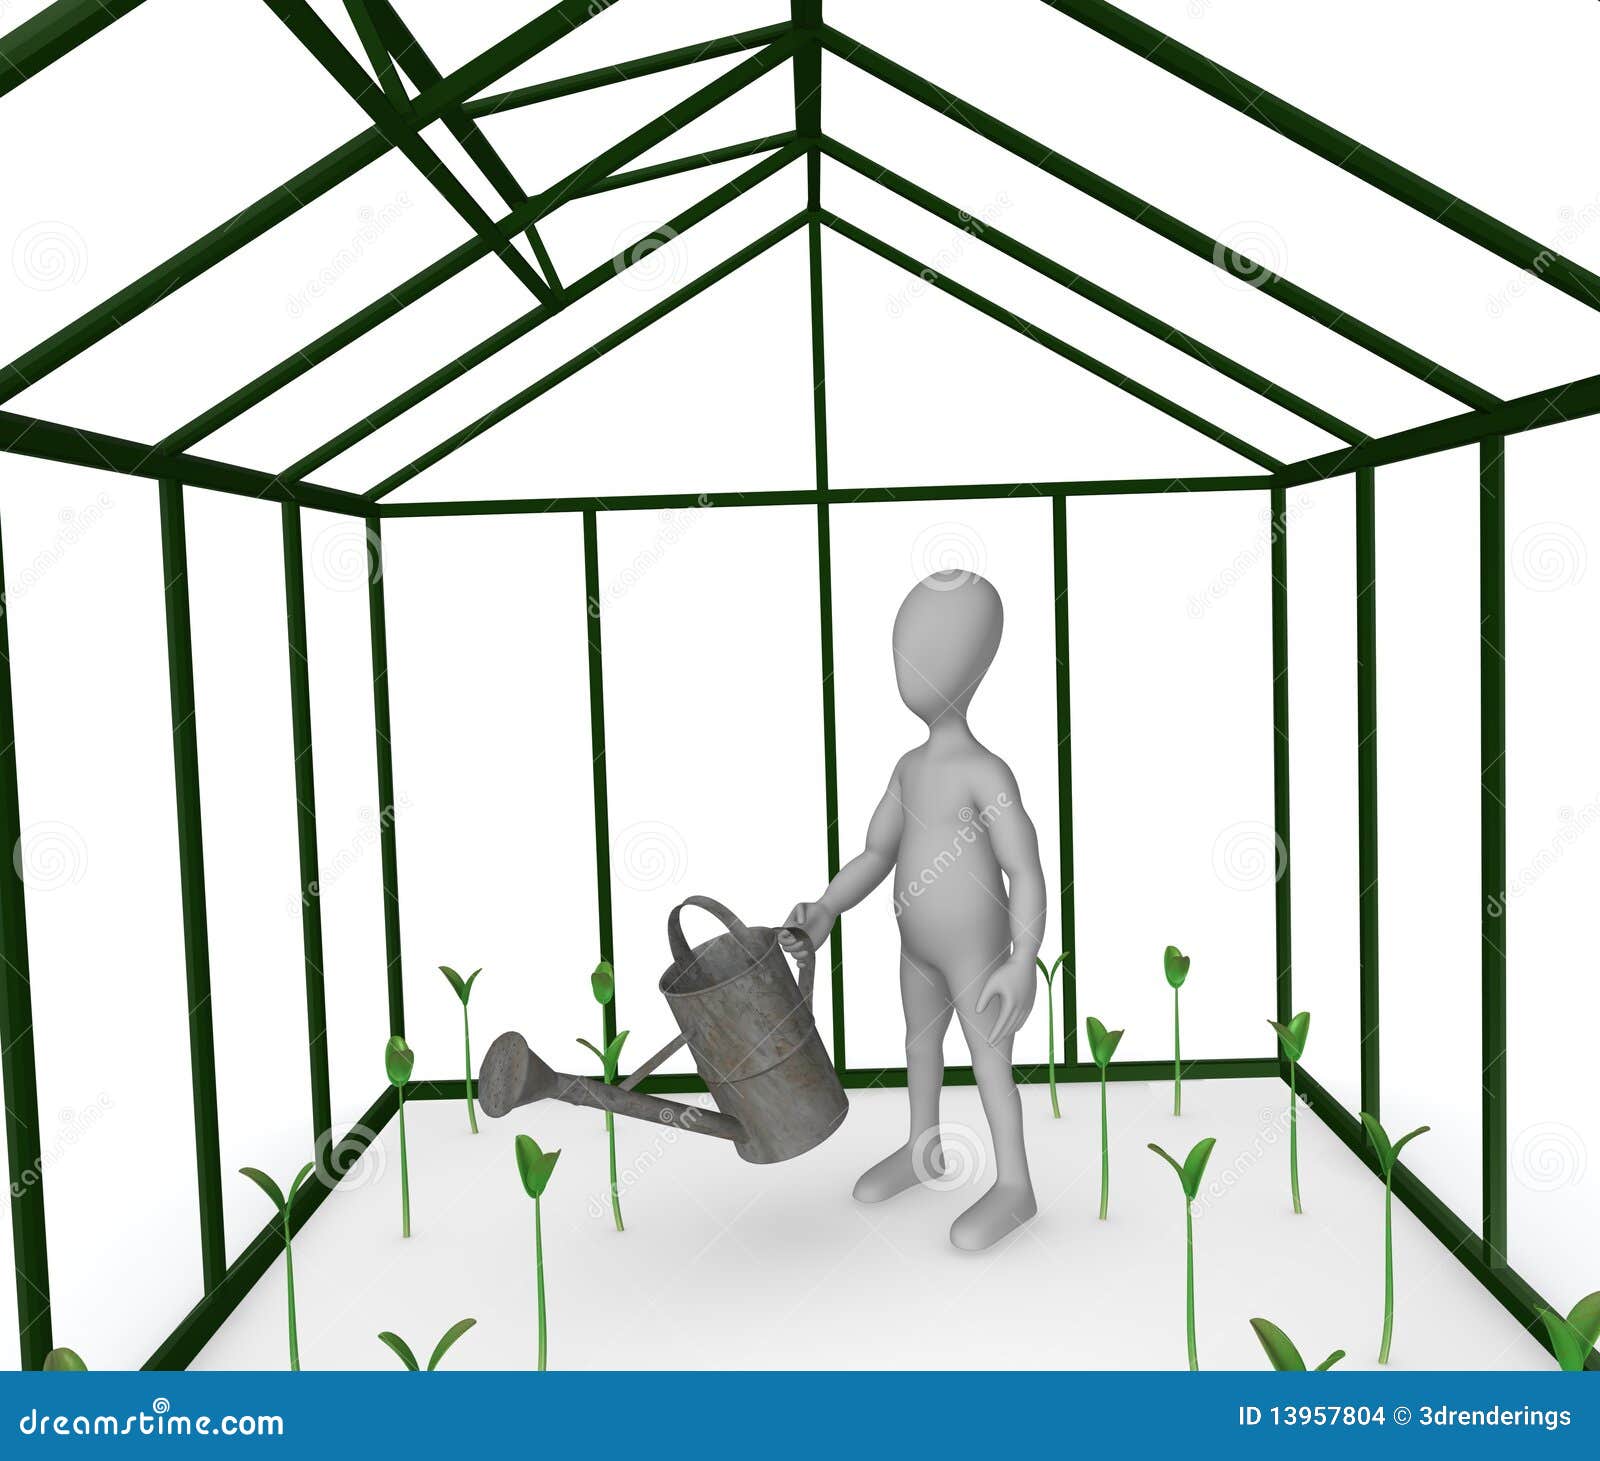 greenhouse clipart - photo #49